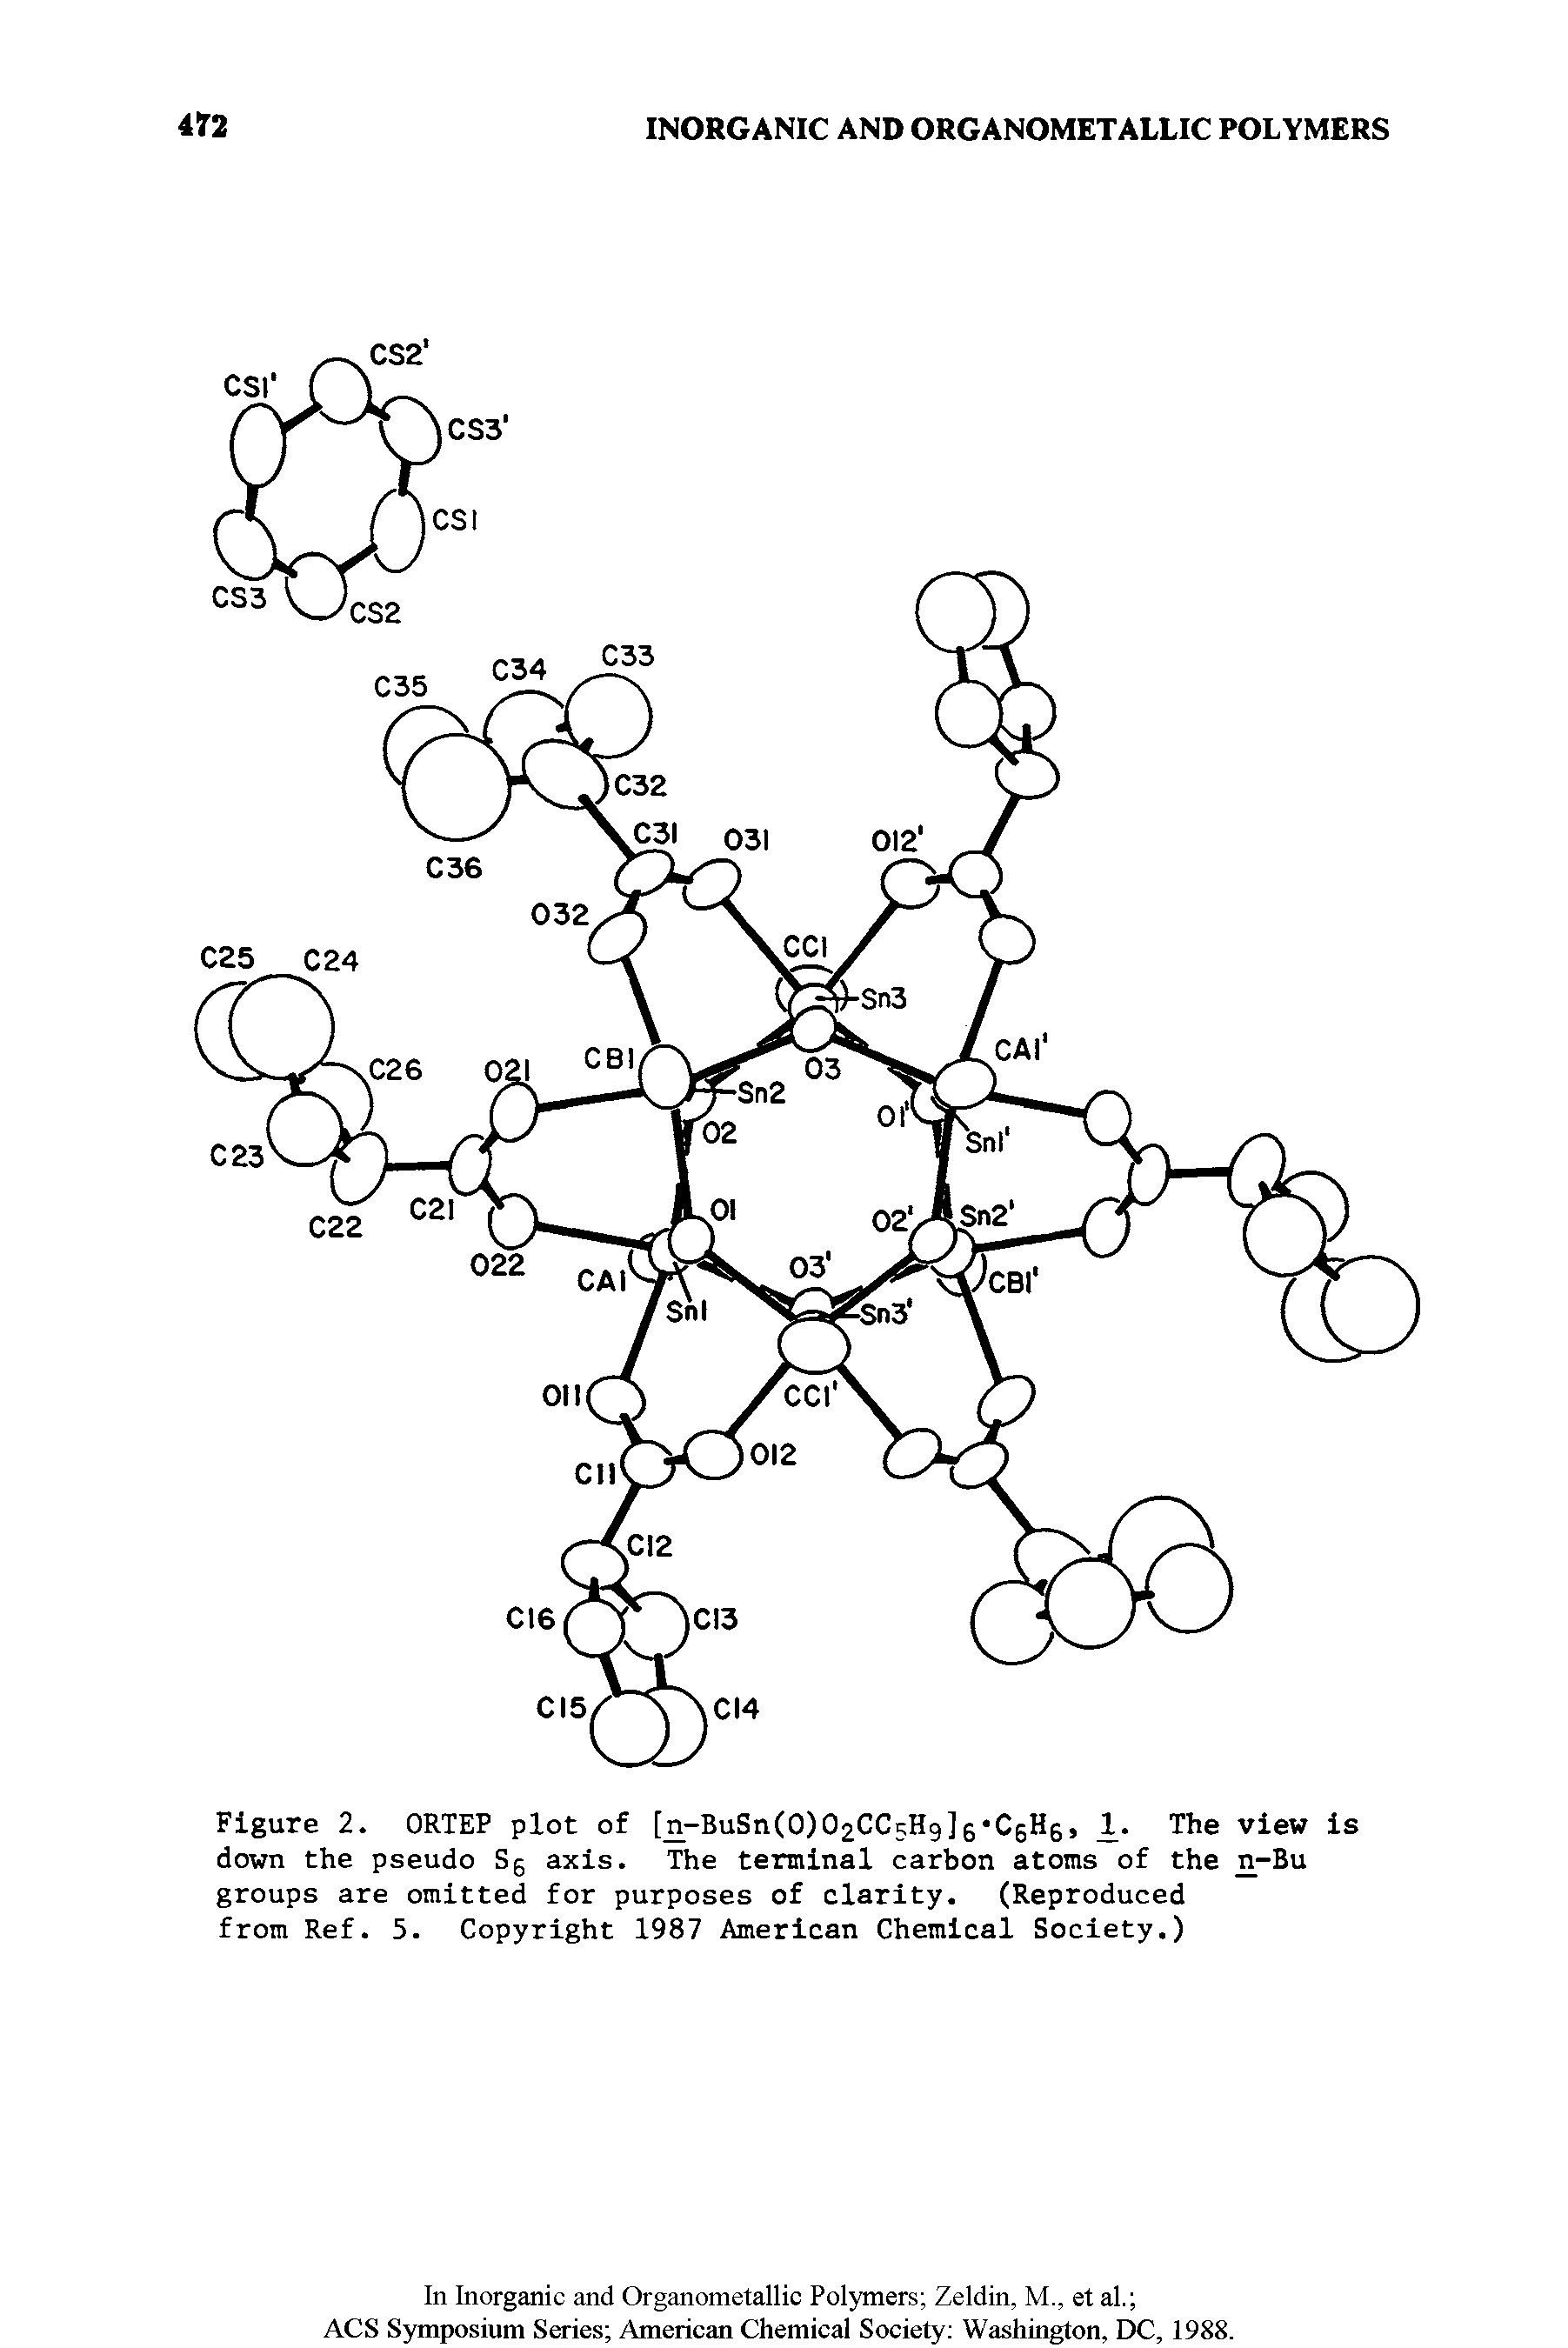 Figure 2. ORTEP plot of [n-BuSnCOjt CCgHgJg-CgHg, 1. The view is down the pseudo Sg axis. The terminal carbon atoms of the n-Bu groups are omitted for purposes of clarity. (Reproduced from Ref. 5. Copyright 1987 American Chemical Society.)...